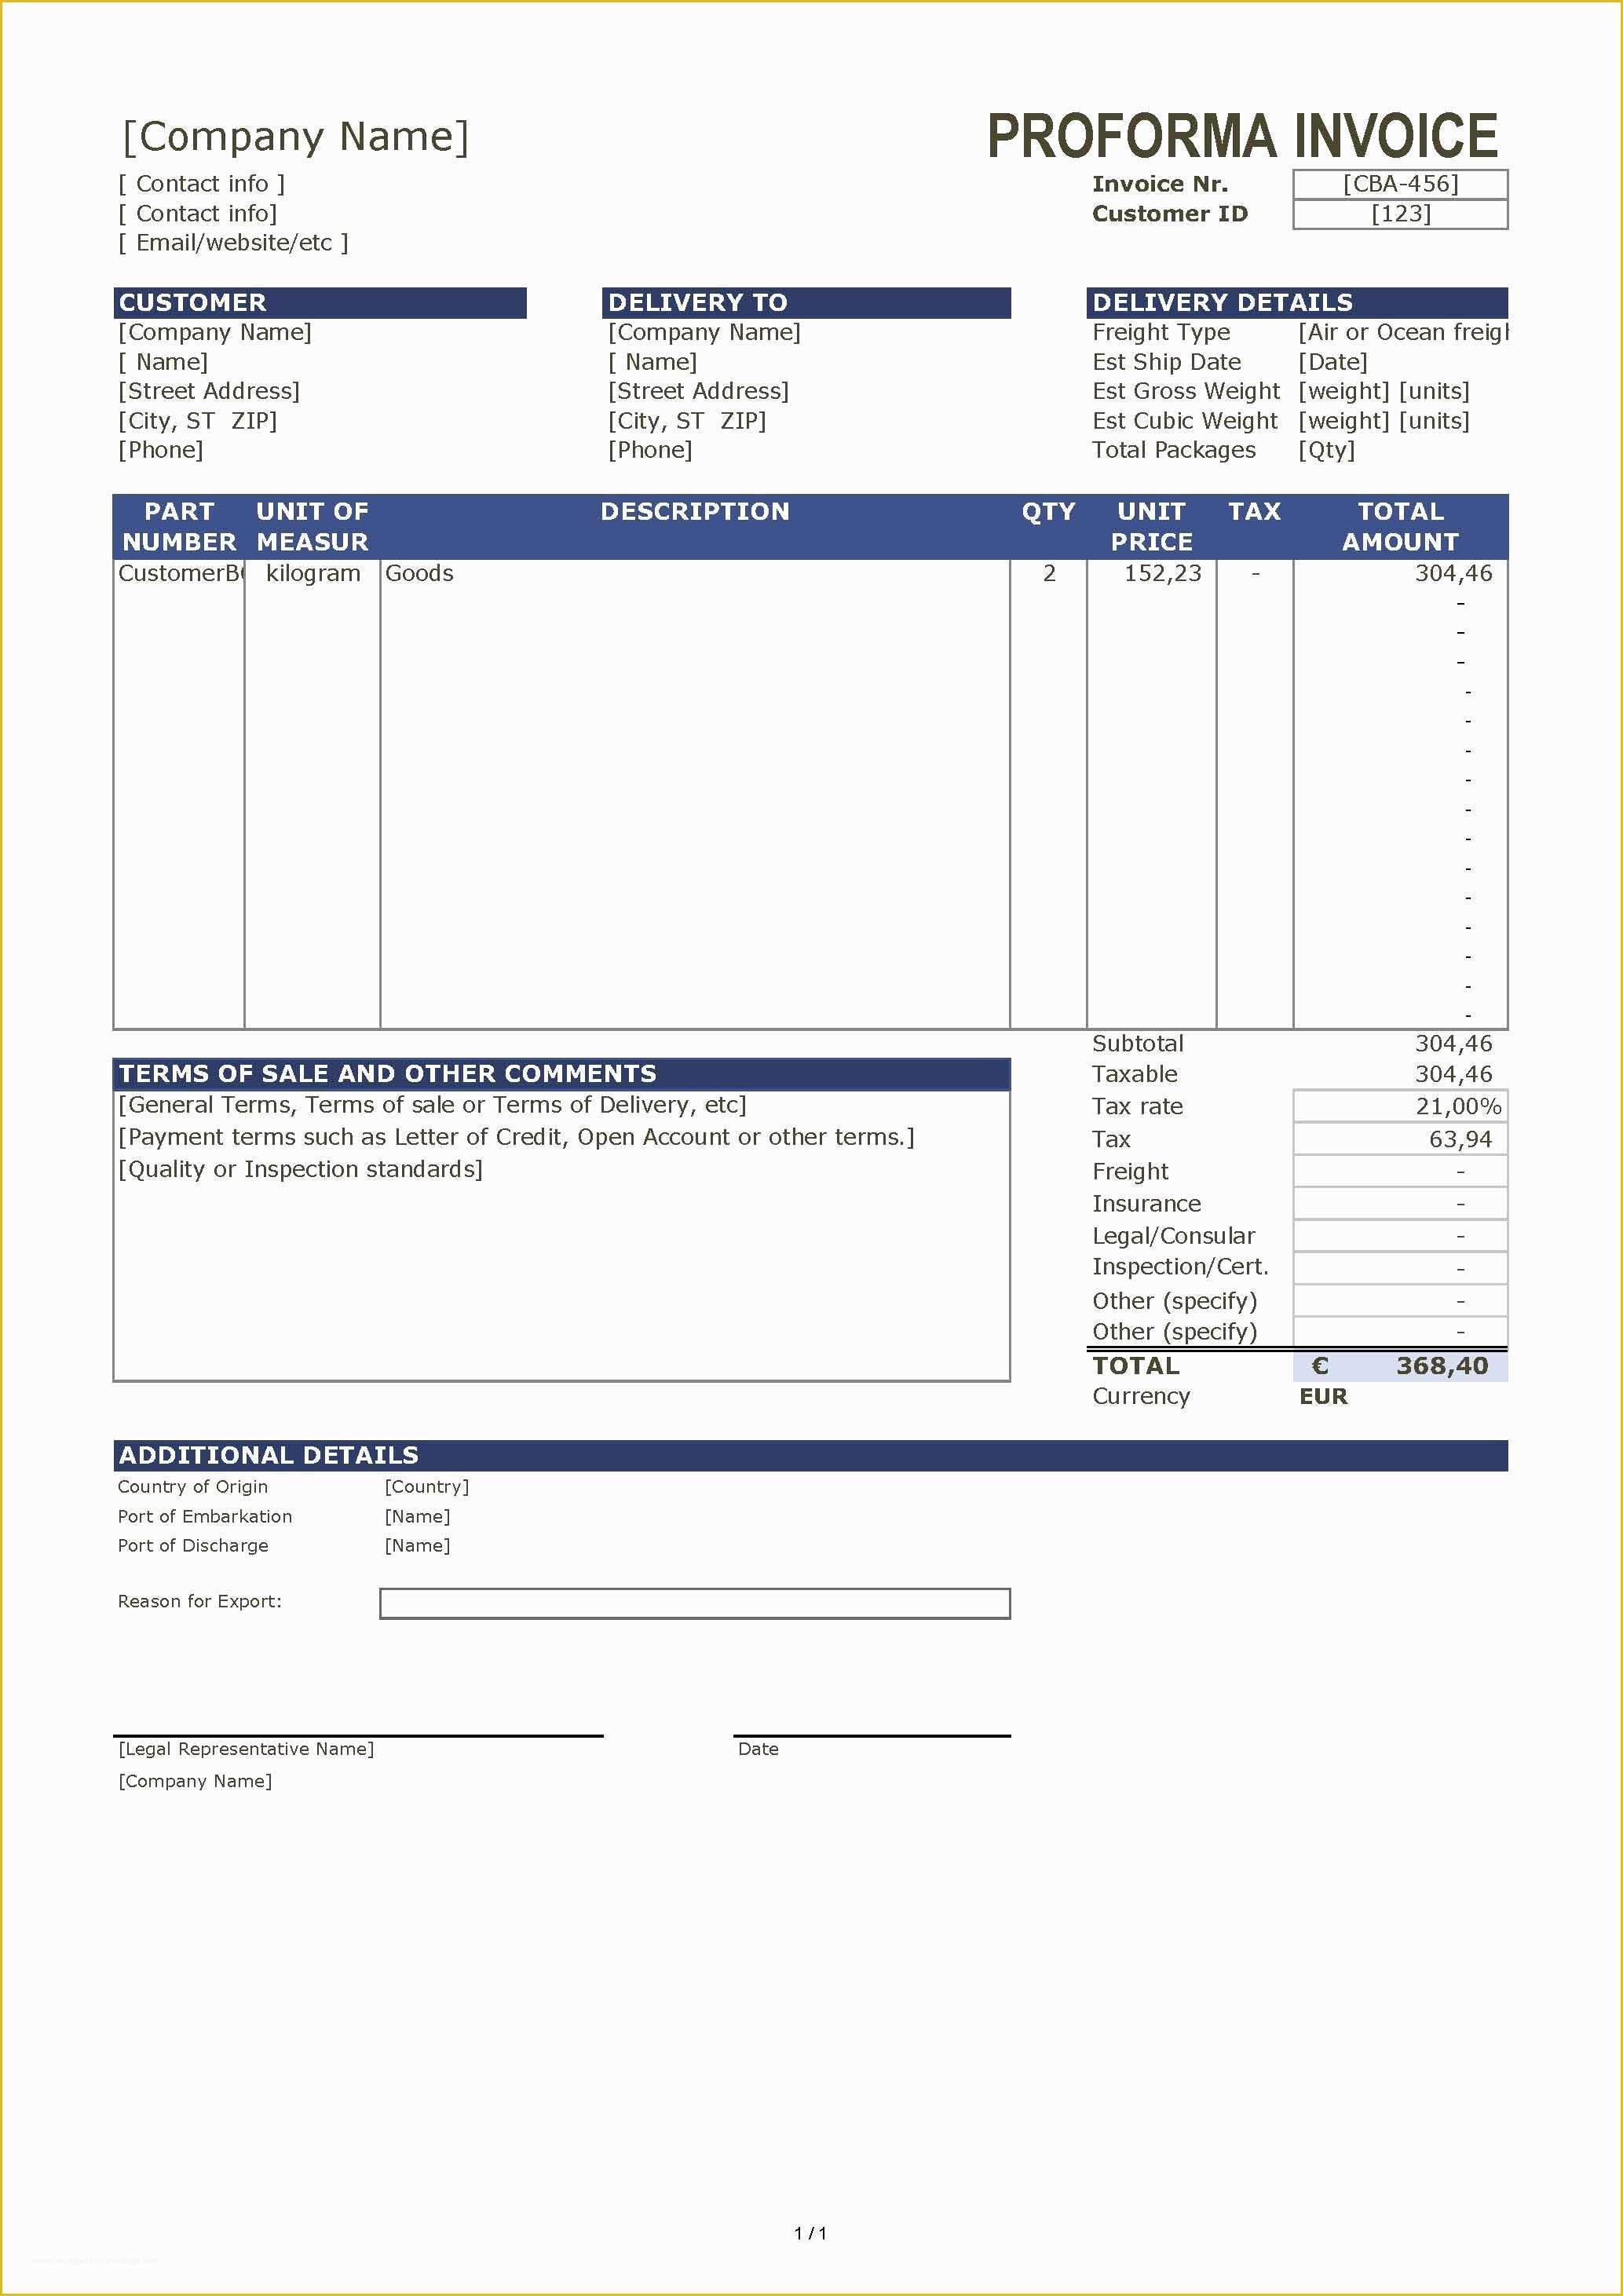 Free Proforma Invoice Template Download Of Free Proforma Invoice Template